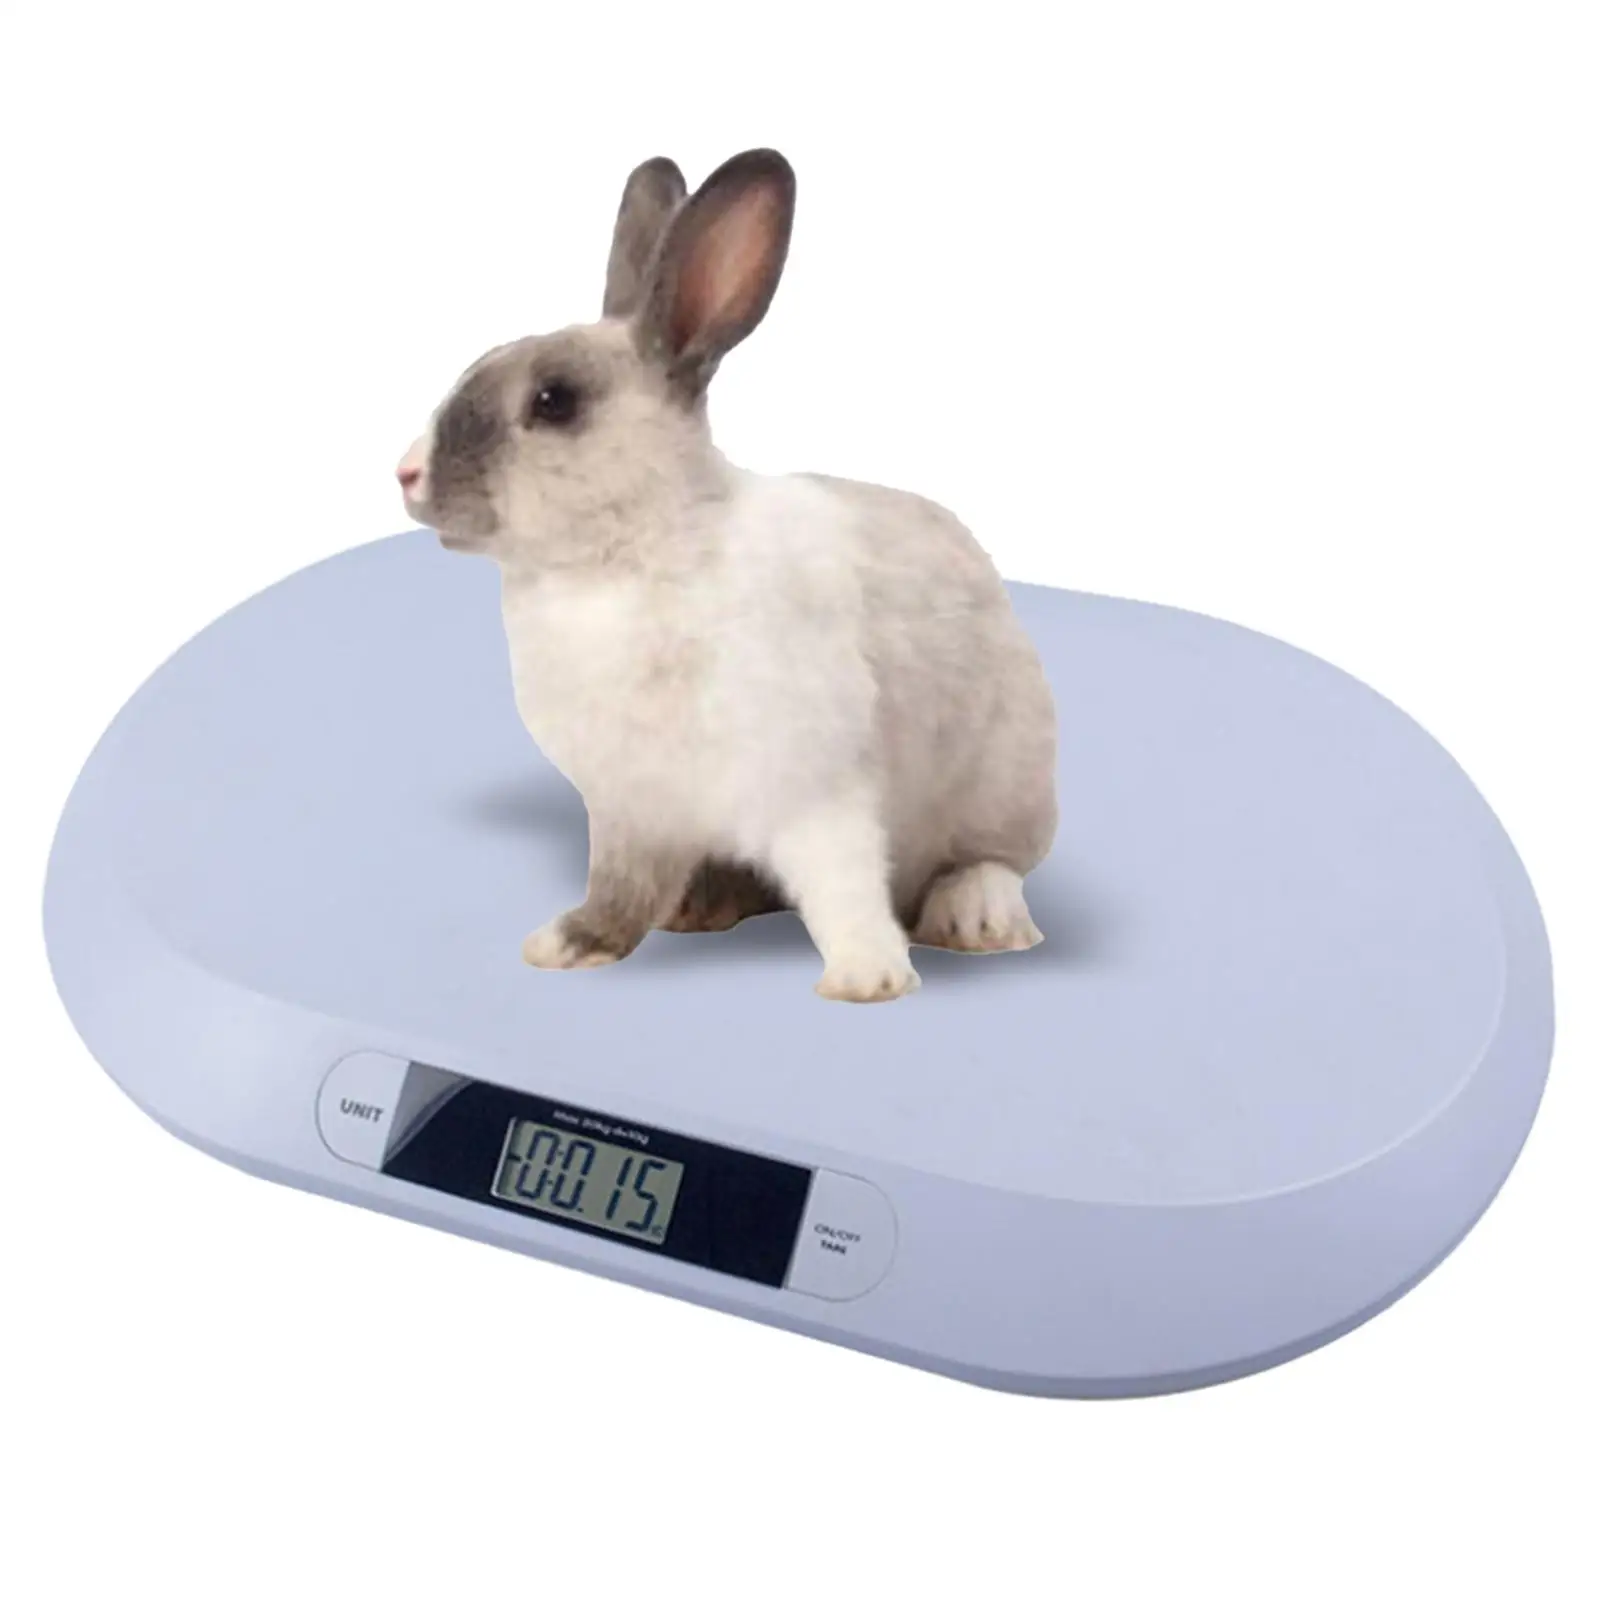 Smart Infant Scale Multifunction Accurate Max 44.1lb Comfort for Infants